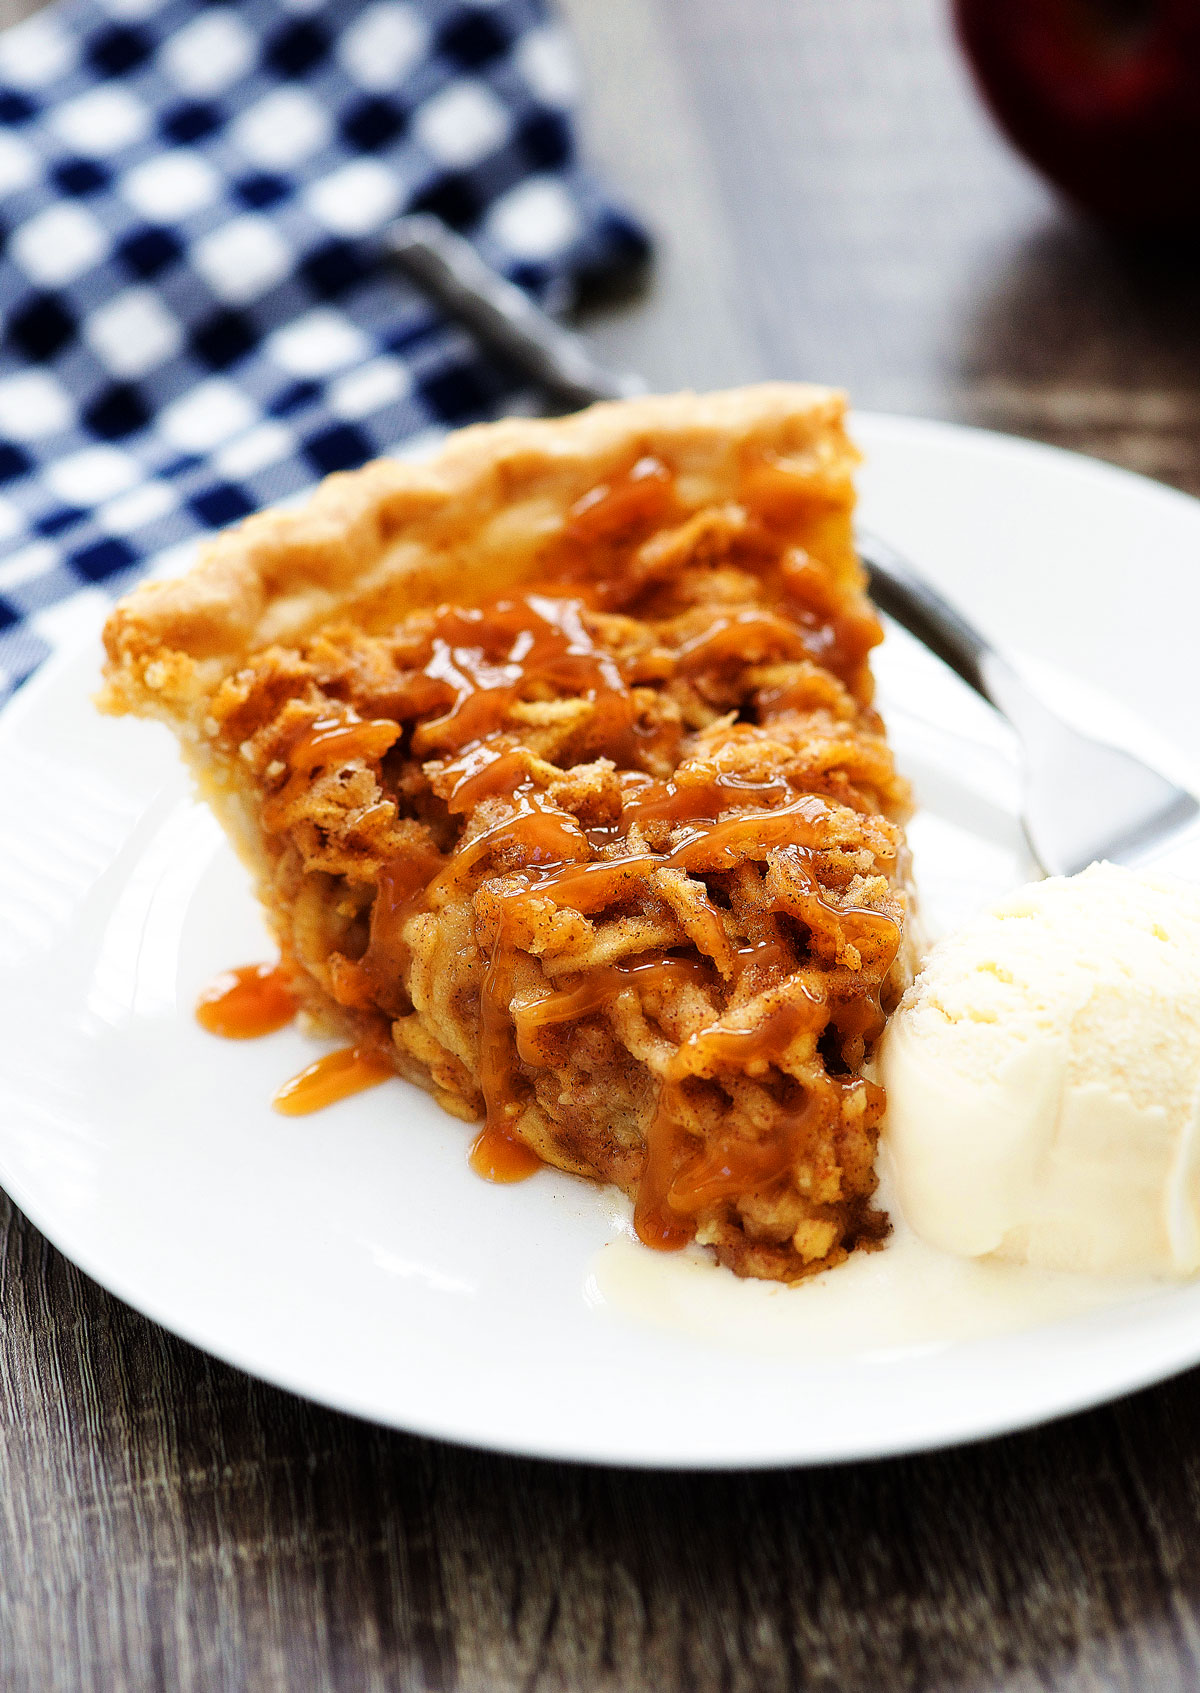 Shredded Apple Pie is filled with grated red apples and has cinnamon flavor. Life-in-the-Lofthouse.com 